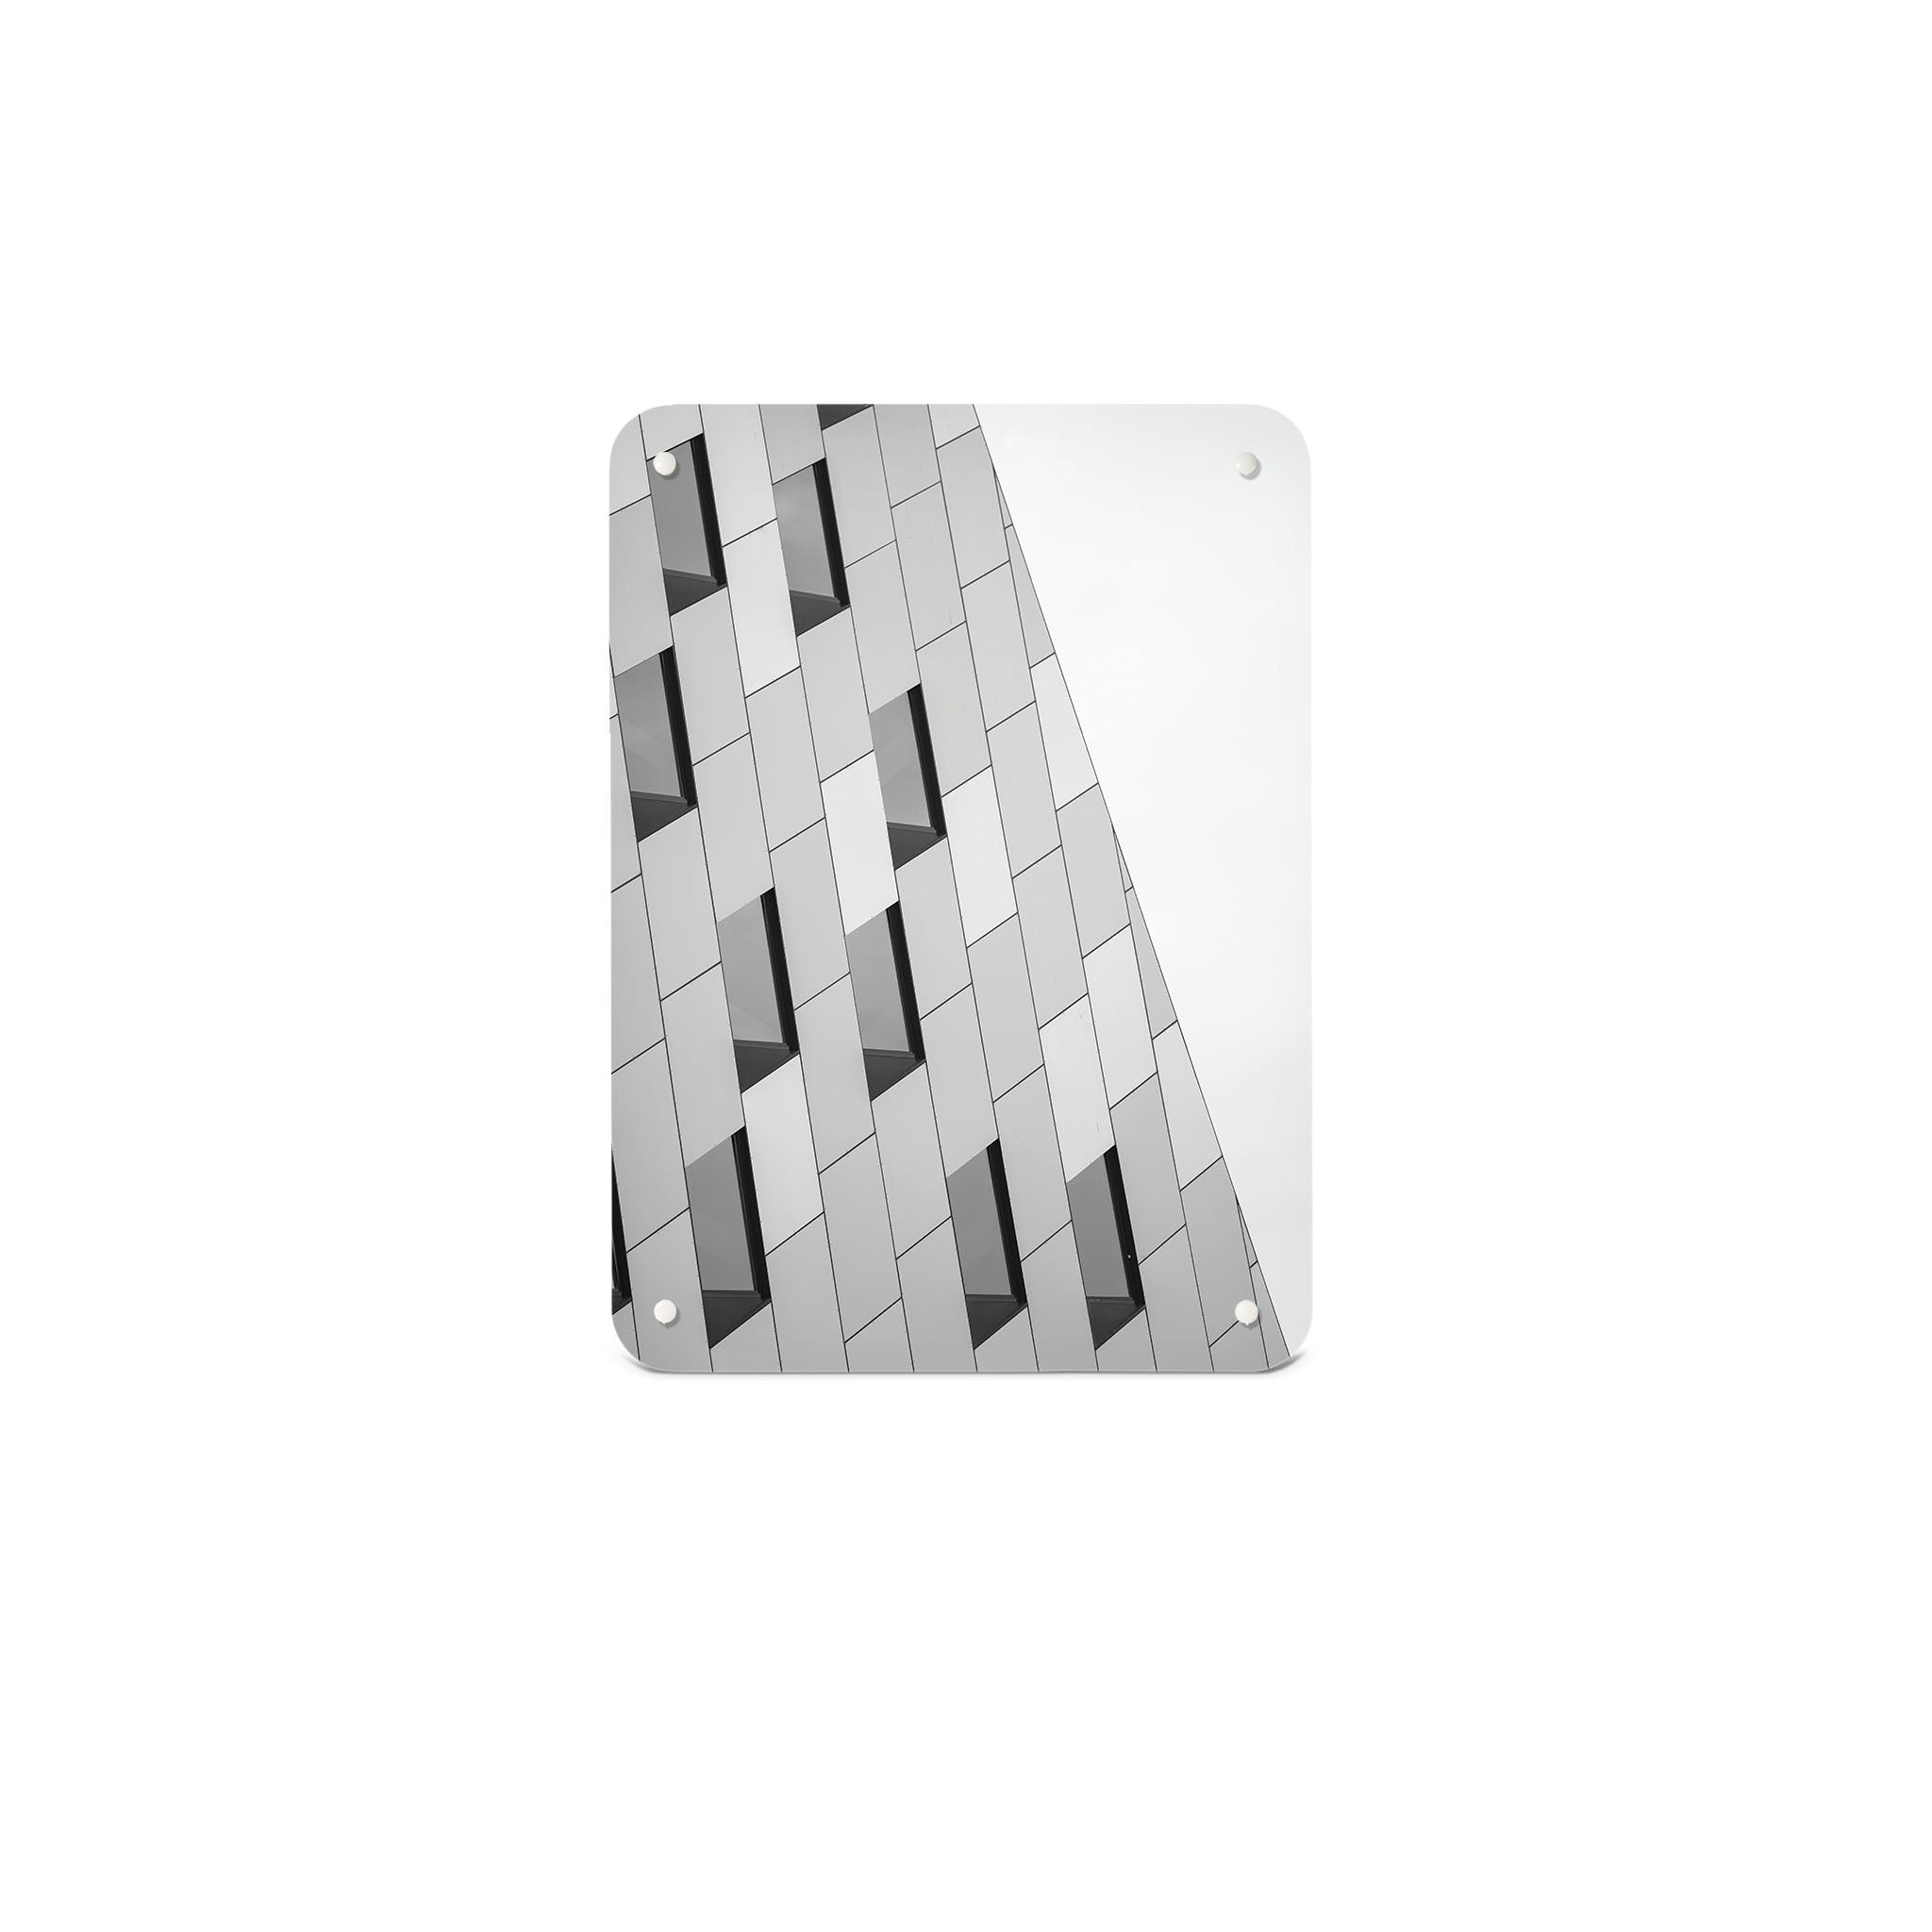 A small magnetic notice board by Beyond the Fridge with an image of an abstract building and windows in black and white 